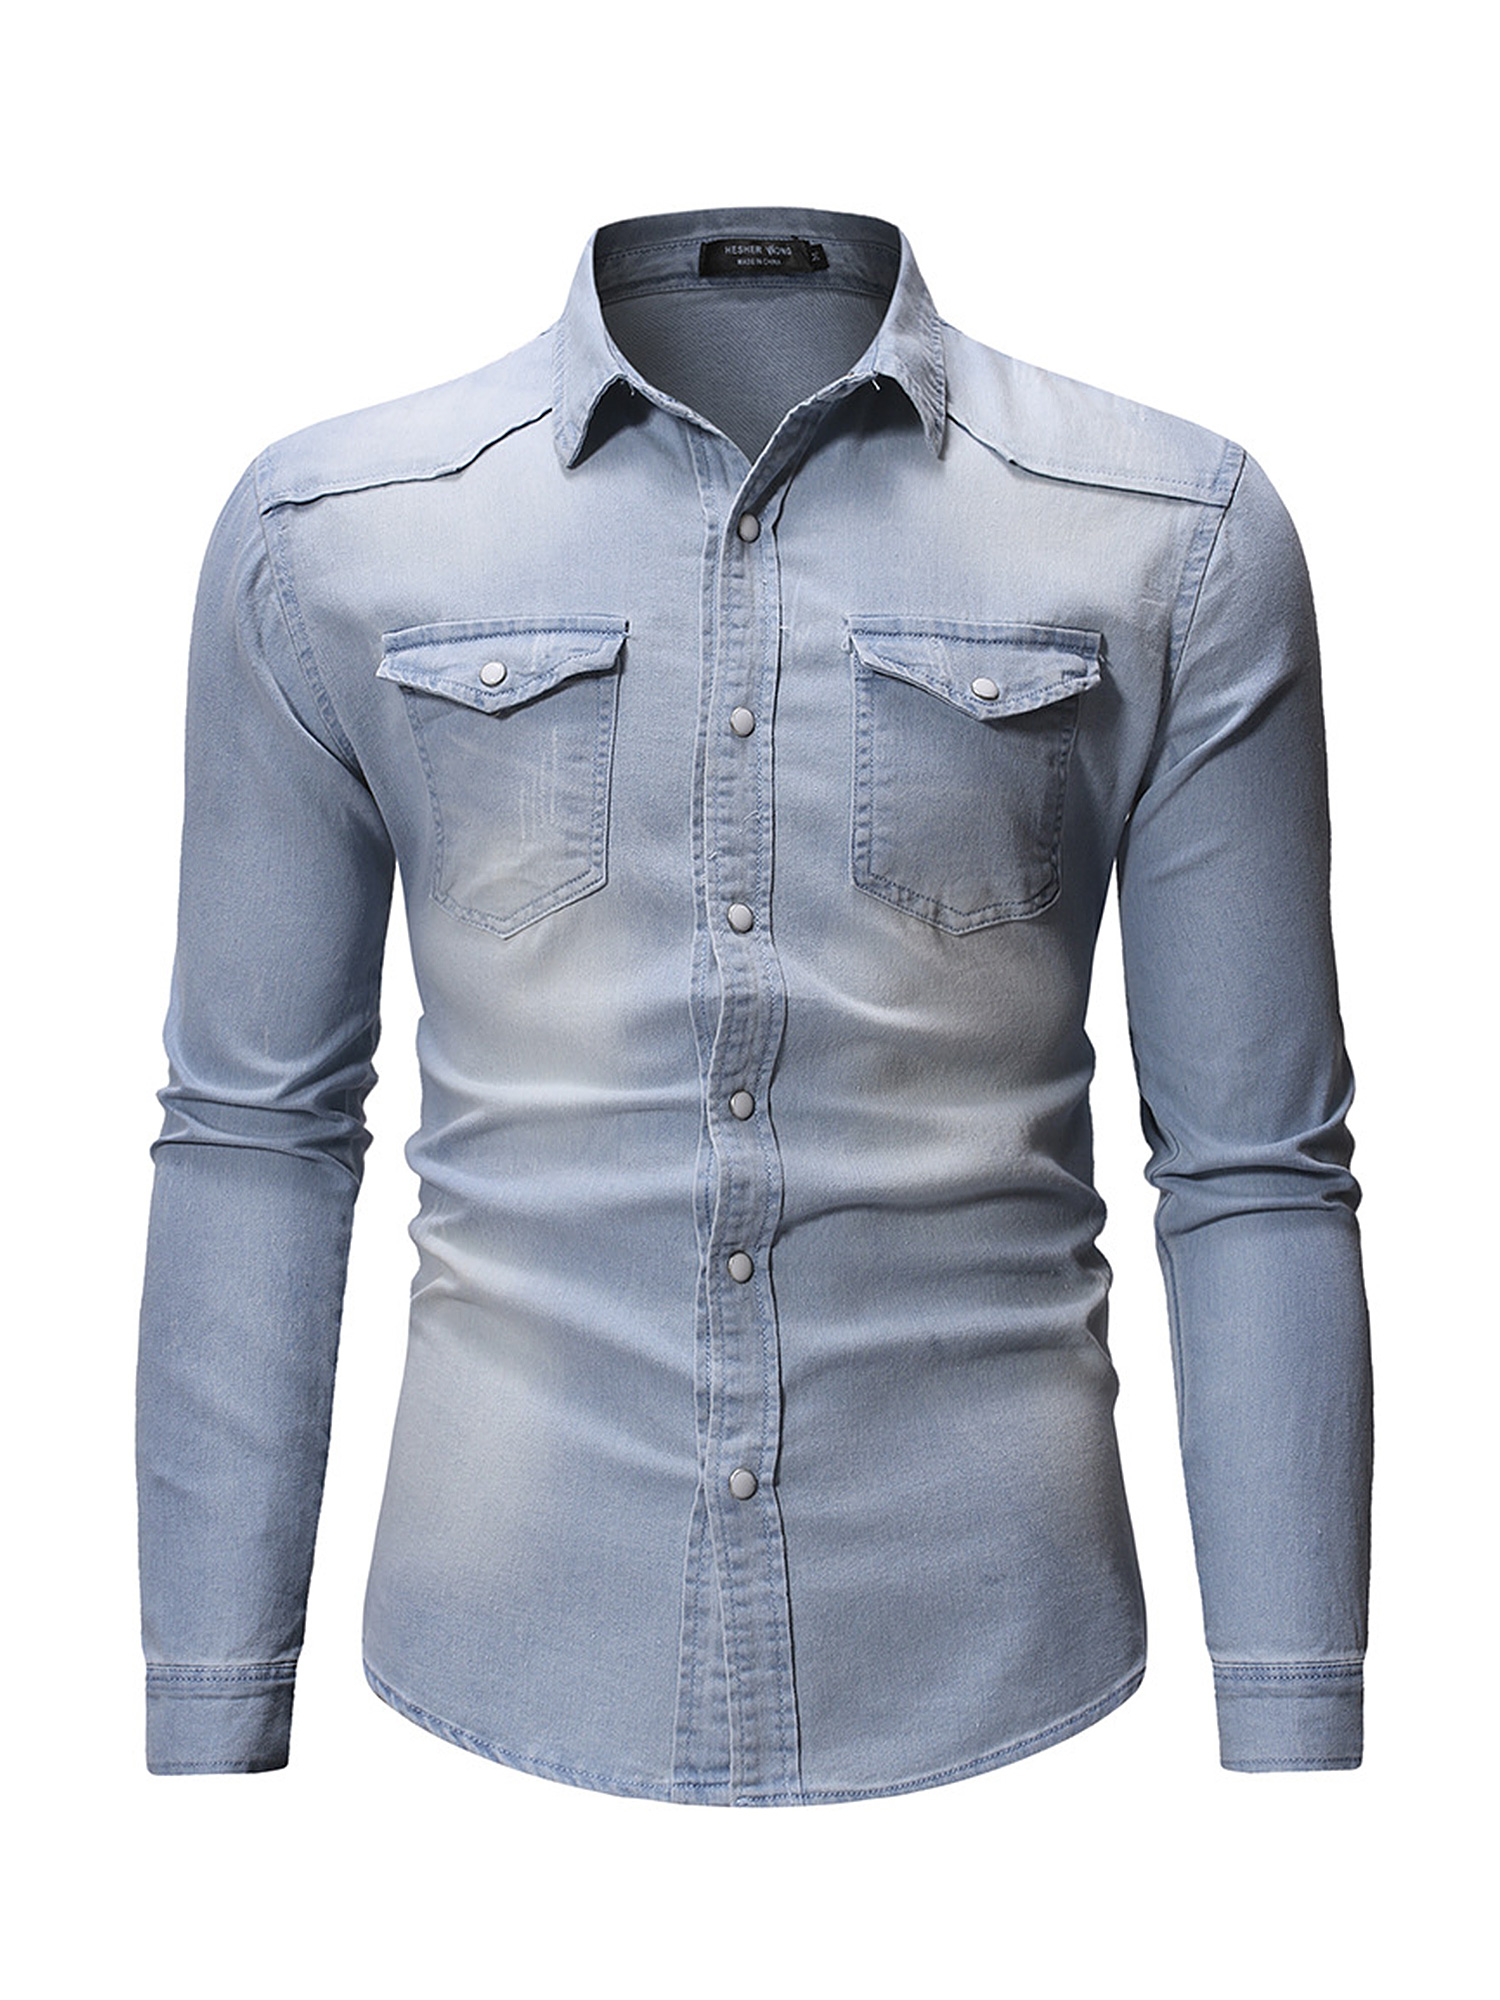 Men's Essential Button Down Dress Shirt Long Sleeve Washed Denim Shirt Lapel Casual Winter Tops - image 3 of 4